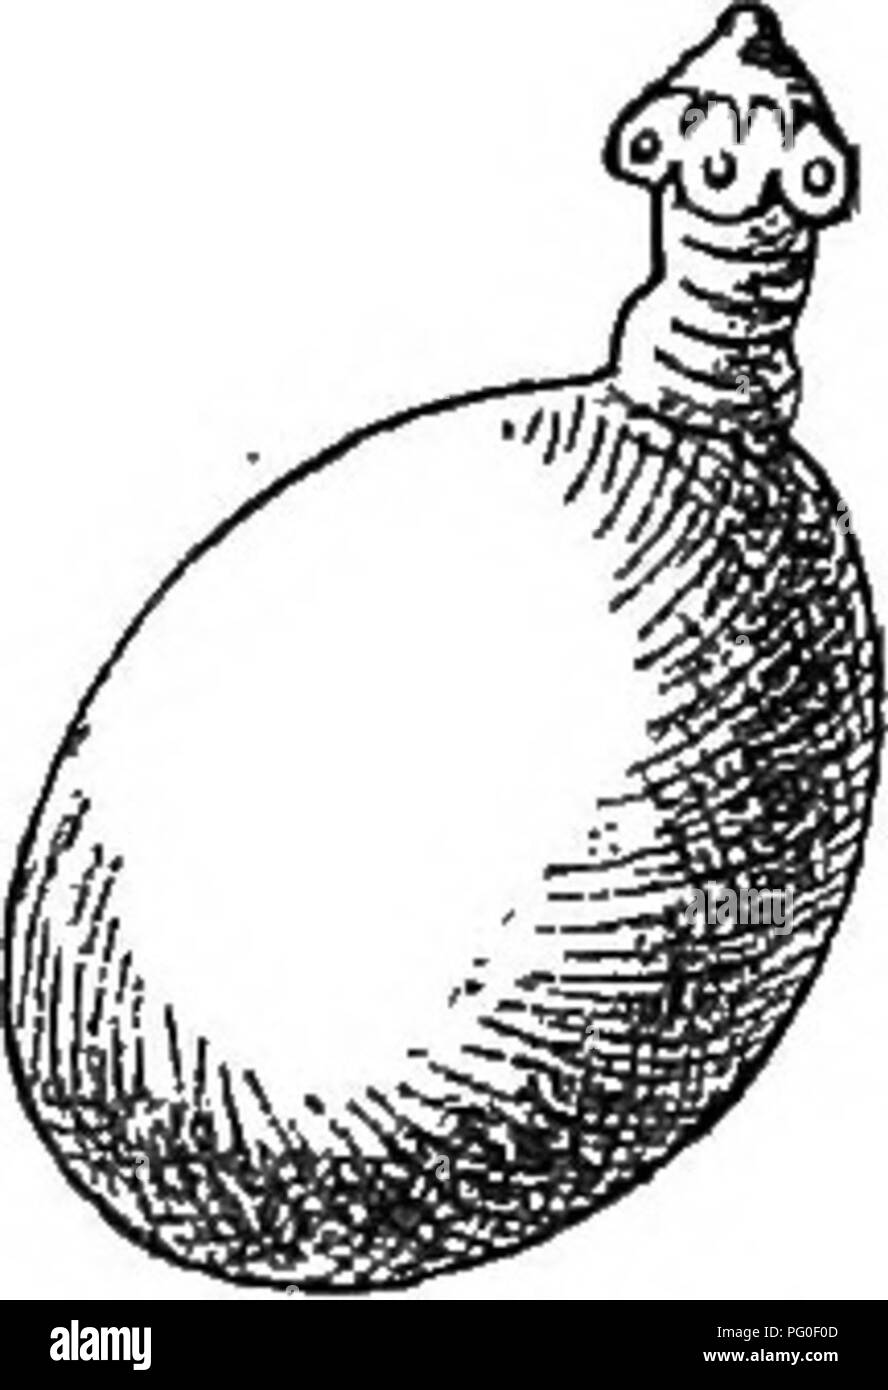 . Agricultural zoology. Zoology. loenarus £ohineoeeeus Fig. 138.—The three types of Bladder-worm, diagrammatically represented. Later—either in the animal originally inhabited by the bladder-worm, or after it has been transferred in the flesh of this to the gut of some carnivorous animal—the bladder-worm con- tracts, so that it can no longer hold the fluid which is present, and the ingrowth is turned inside out, the suckers thus becoming external. The tapeworm head is formed in this way, but the bladder still remains attached to its hinder end (Fig. 139). If a host in- habited by bladder-worms Stock Photo